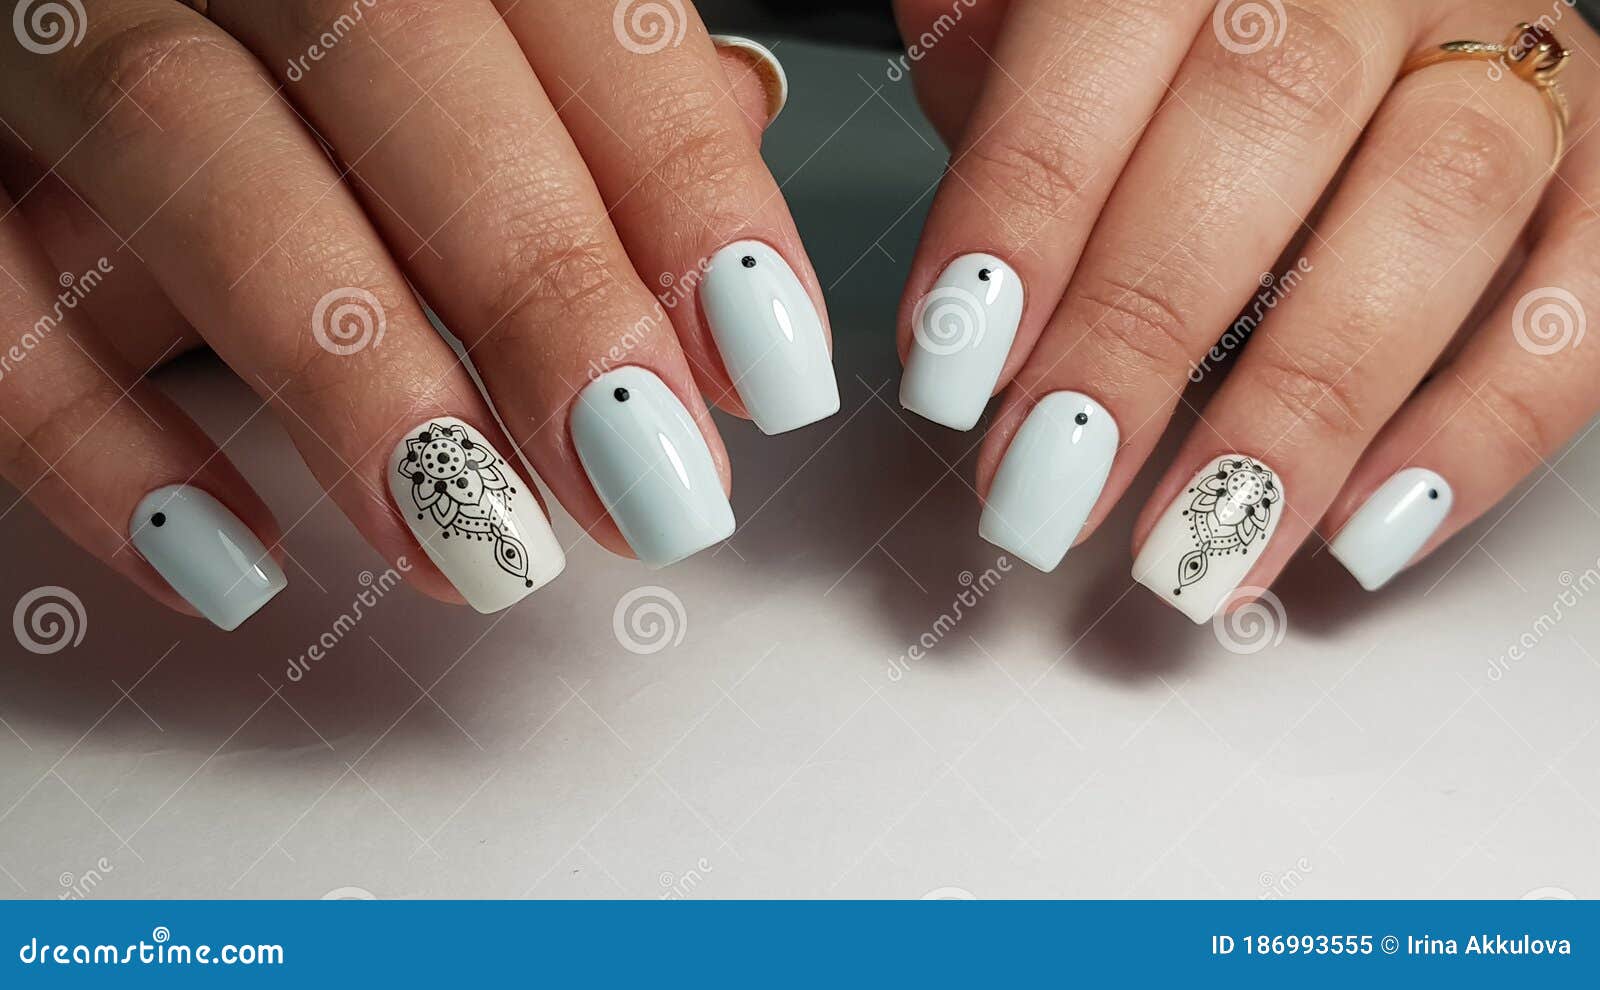 Nail Art Stickers | Embossed Stereoscopic Lace Baroque Nail Decals | S